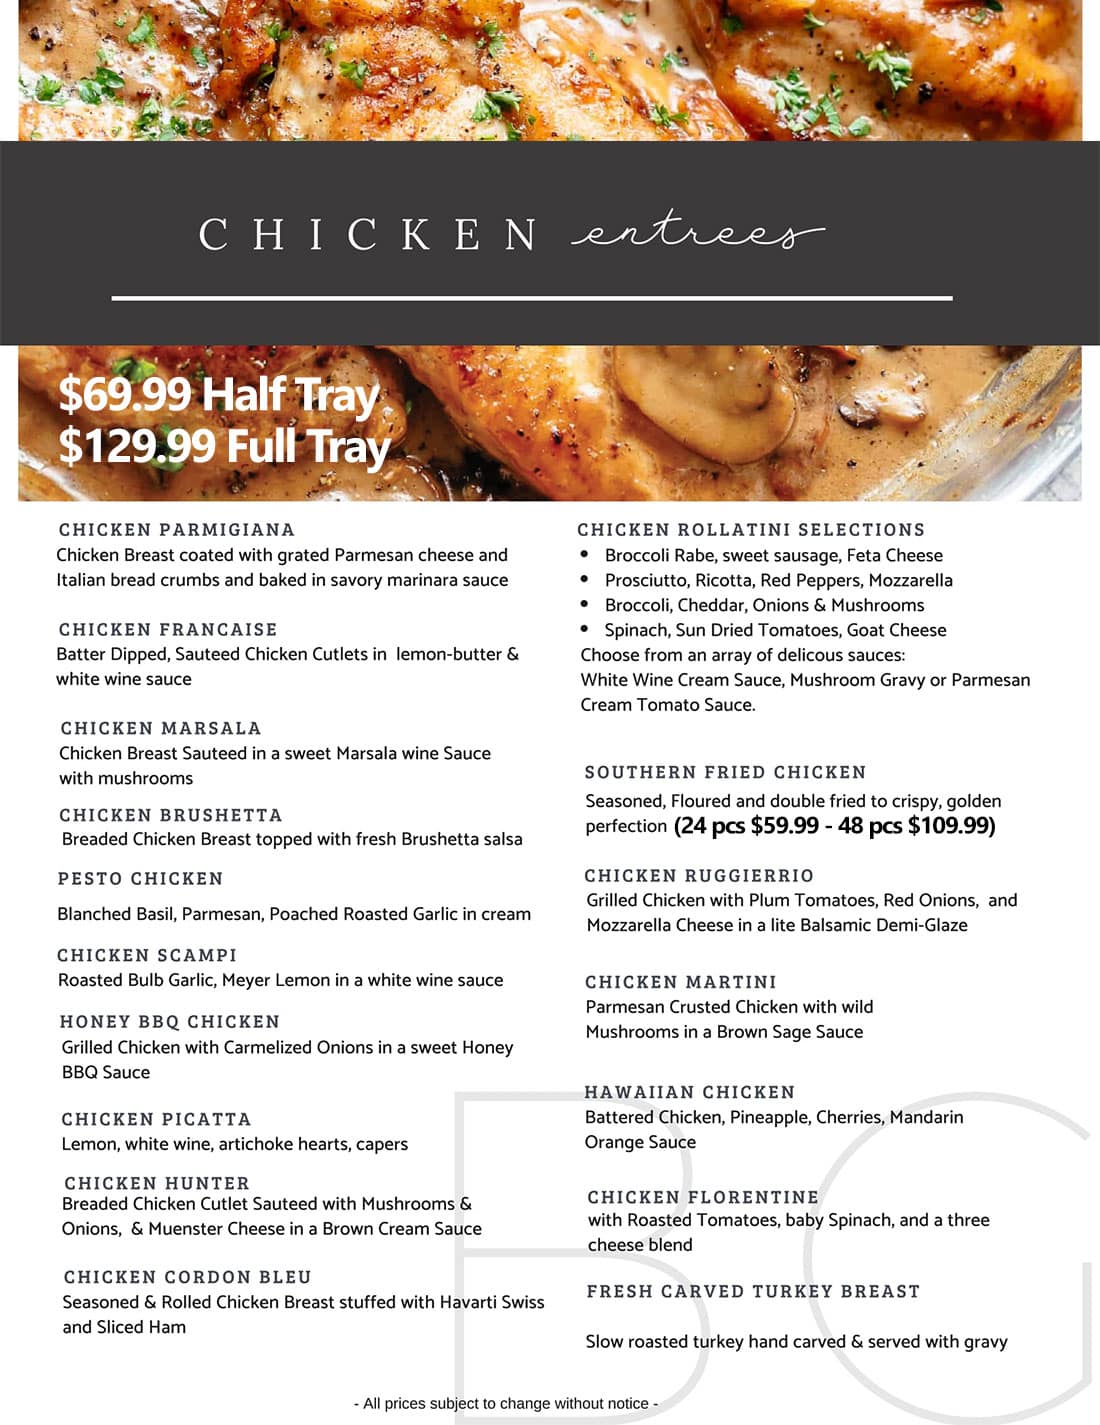 Catering Menu Chicken Entrees